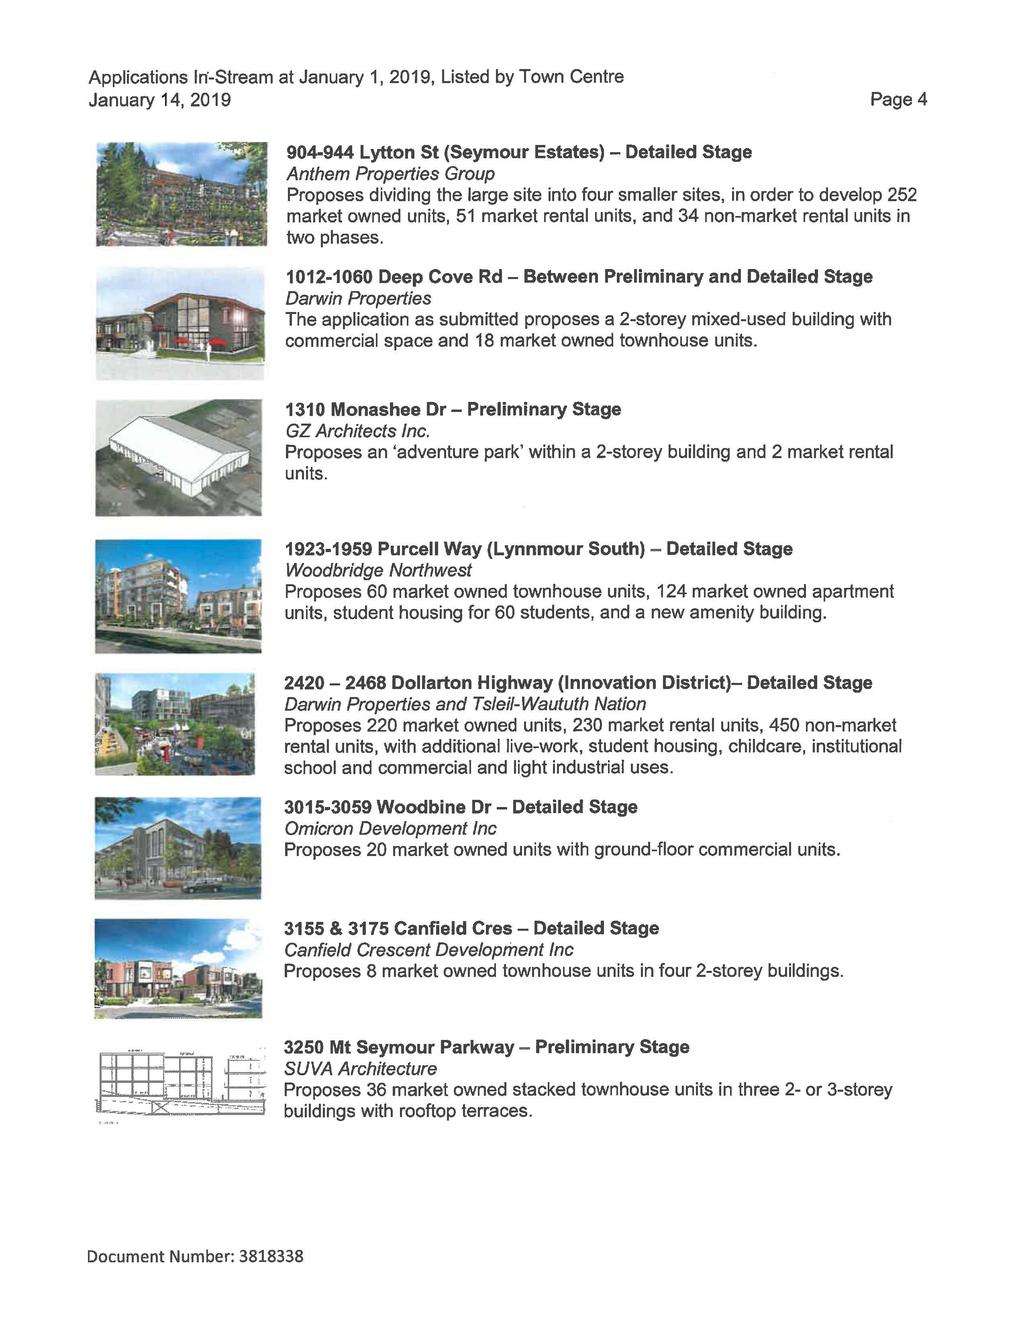 Applications 1n -Stream at January 1, 2019, Listed by Town Centre January 14, 2019 Page4 904-944 Lytton St (Seymour Estates) - Detailed Stage Anthem Properties Group Proposes dividing the large site